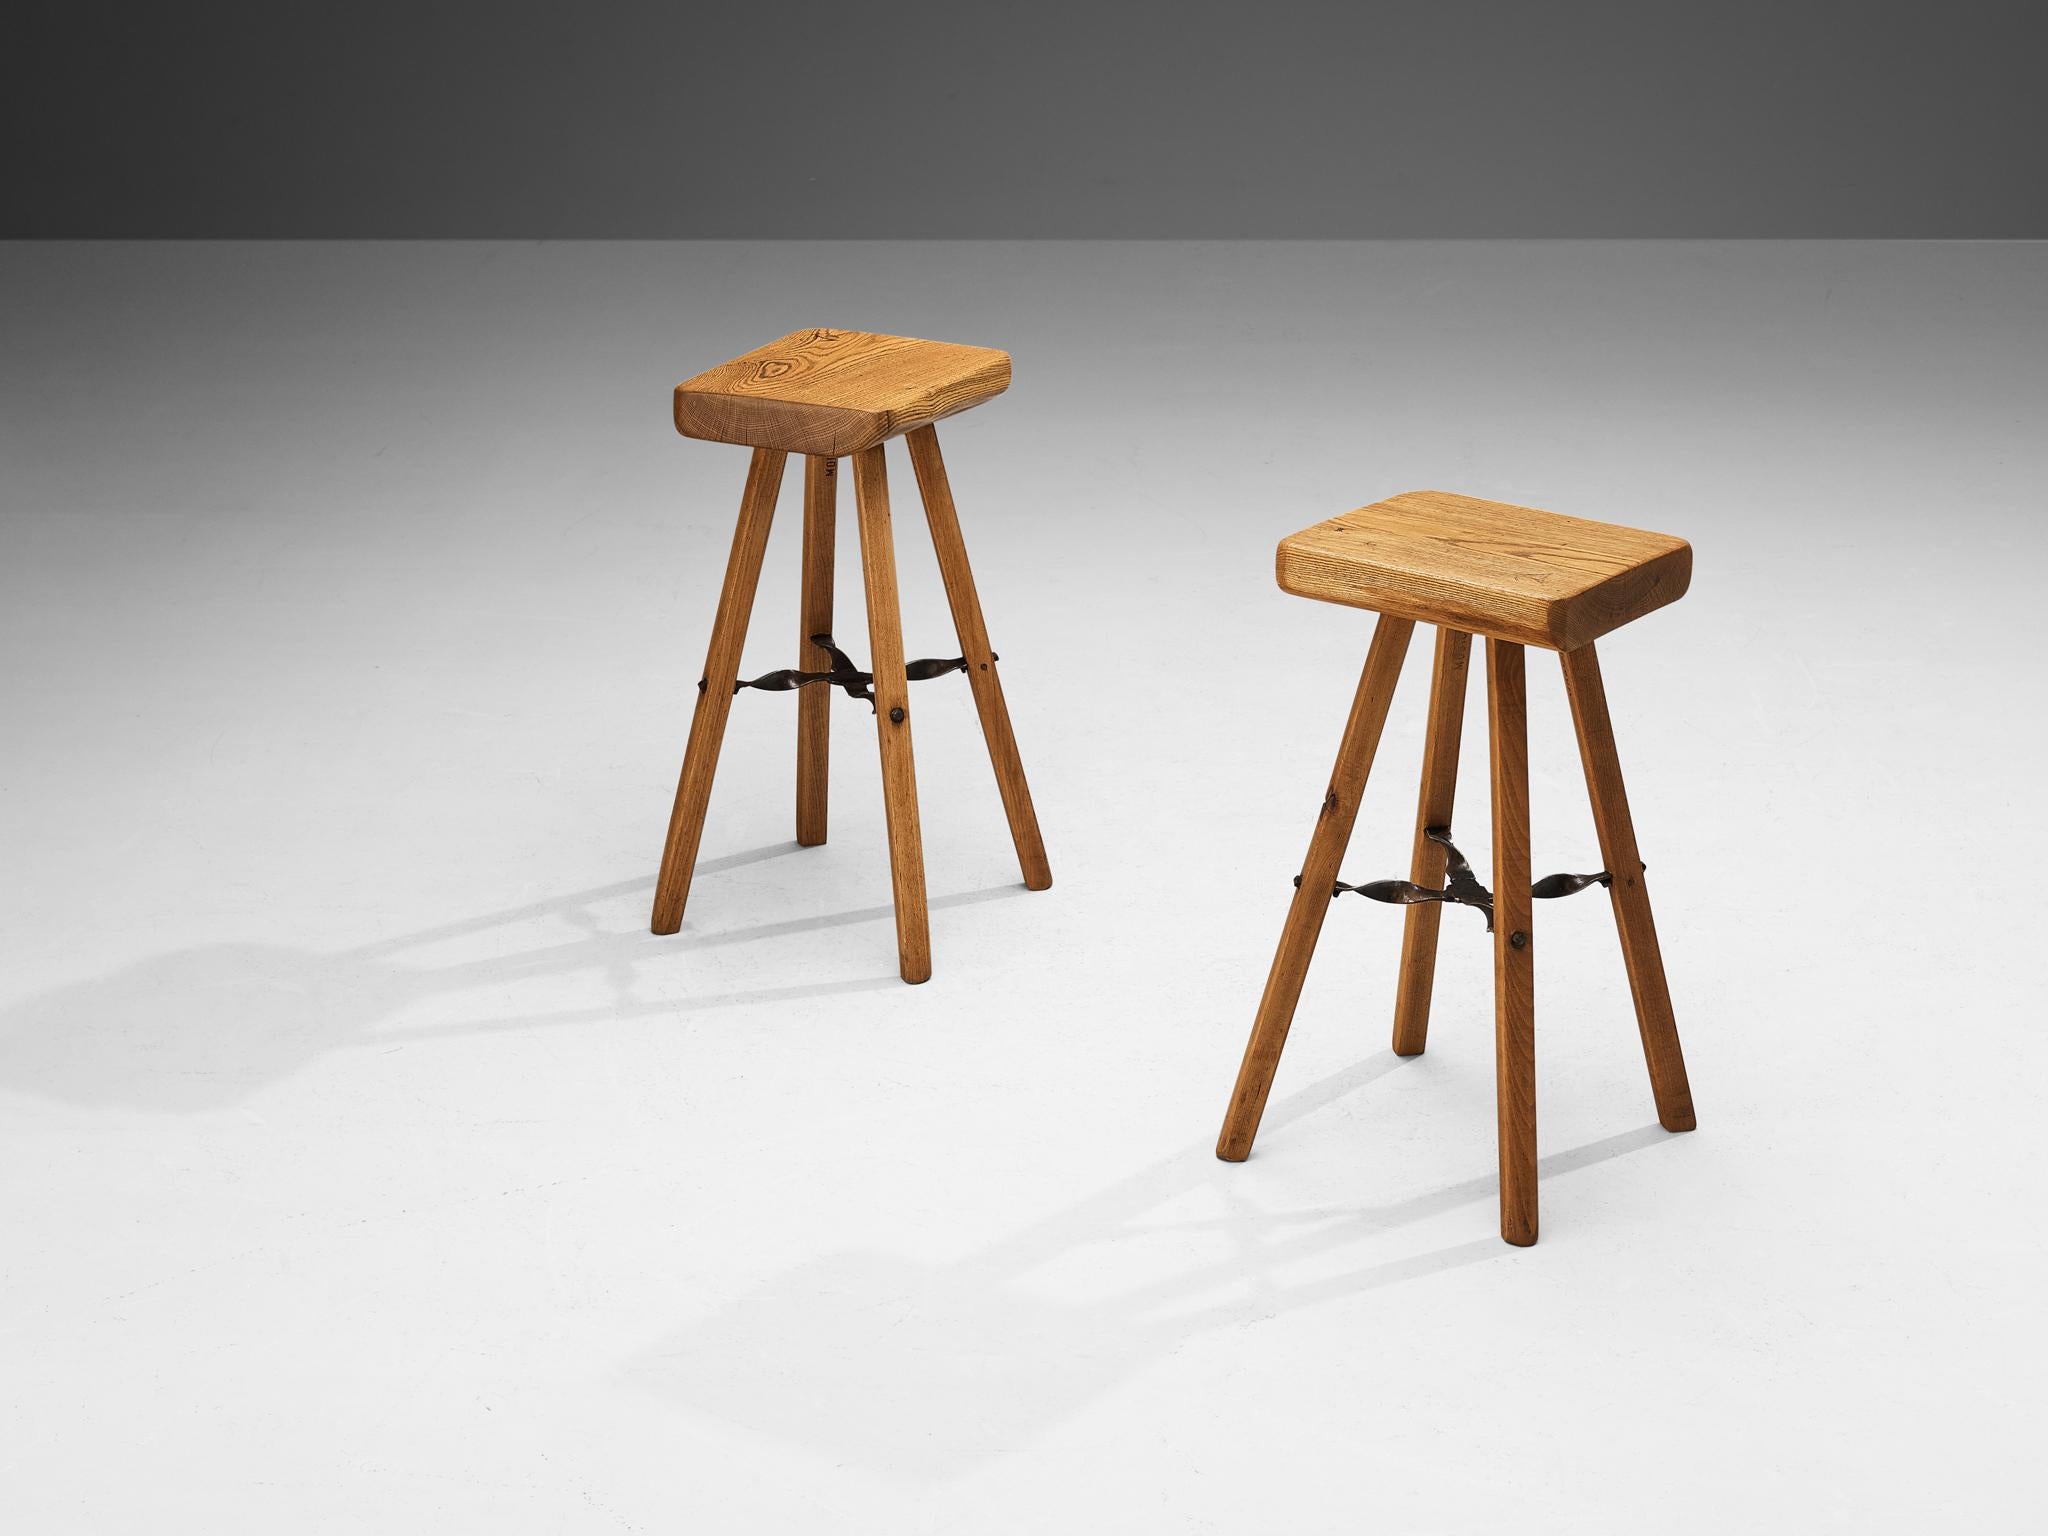 Mobichalet, bar stools, pine, Belgium, 1950s.

These high stools are produced by Mobichalet in the 1950s. The stools are all slightly different in form which gives them their rustic and naturalistic look. The chairs have a wrought iron cross between